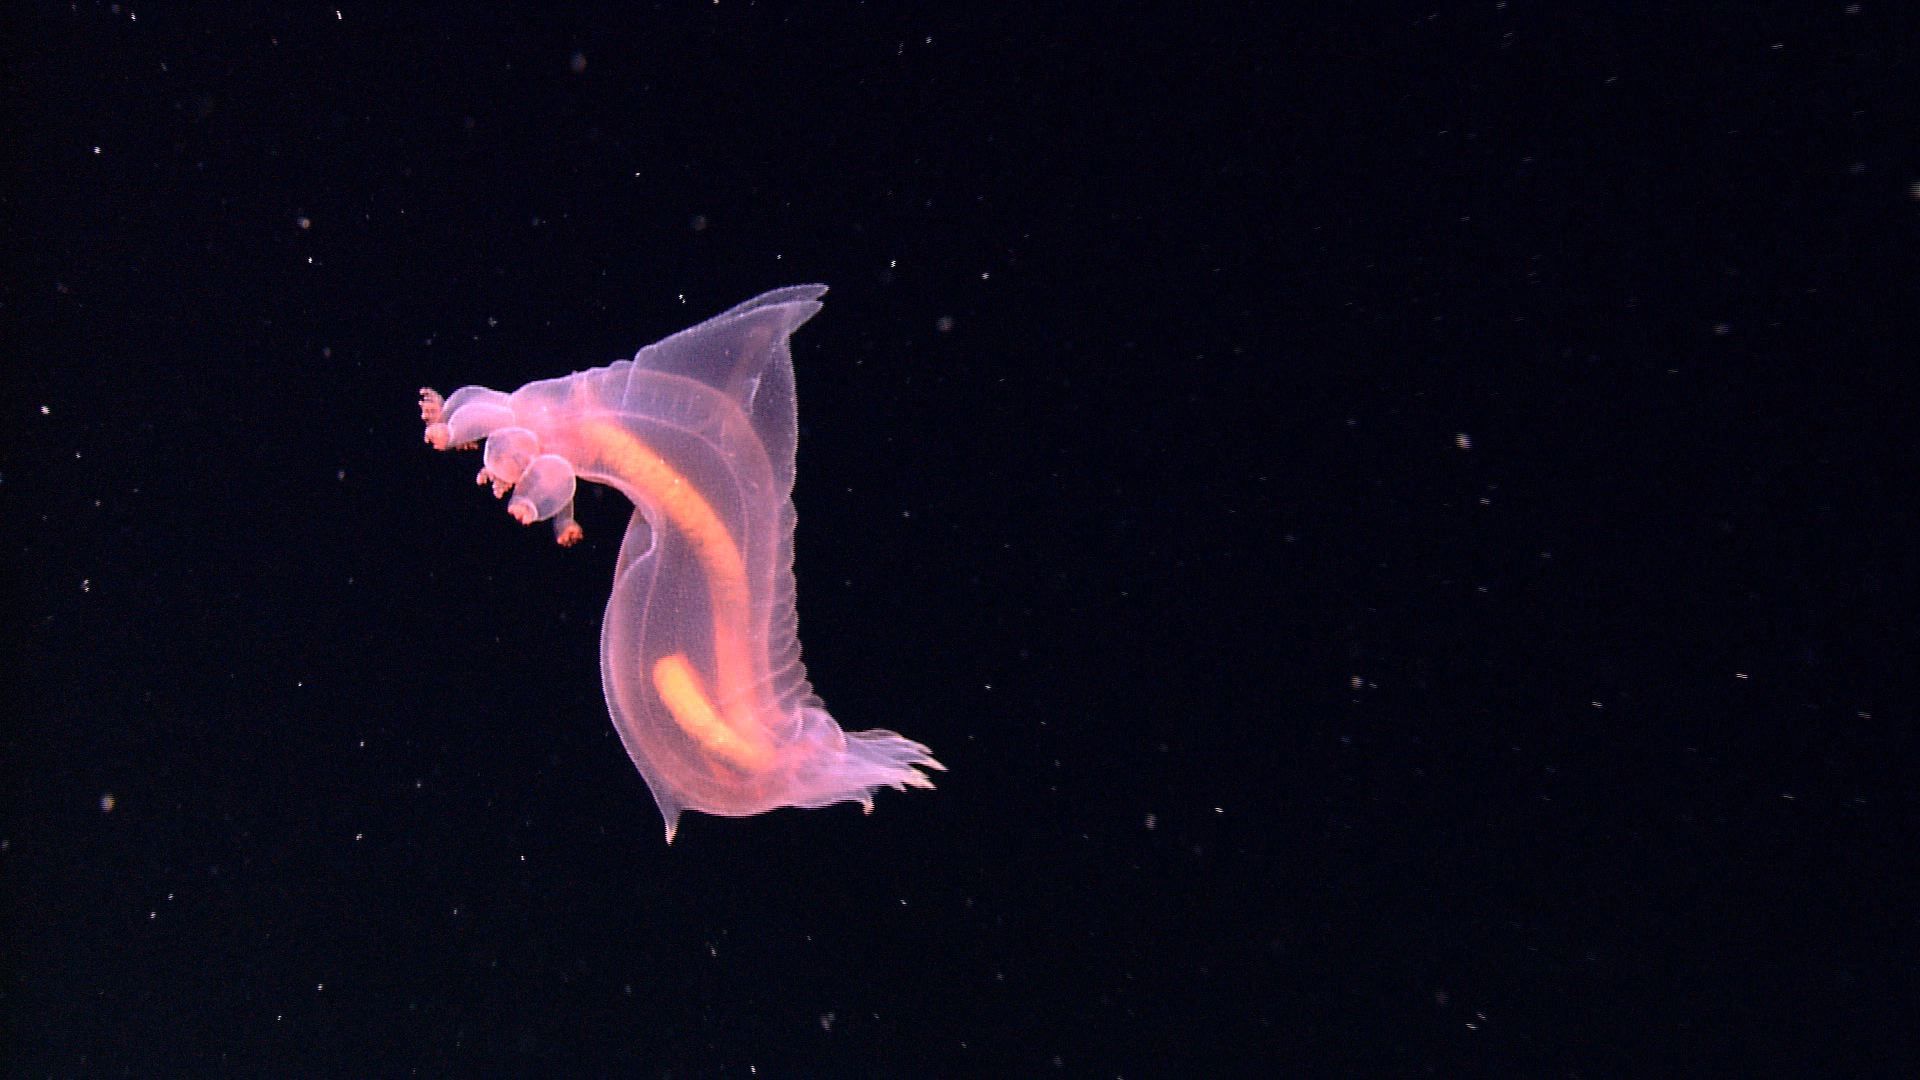 Despite being discovered in the 1880s, the enypniastes eximia was not caught on camera until 2017. This genus of deep-sea sea cucumber is unkindly called a 